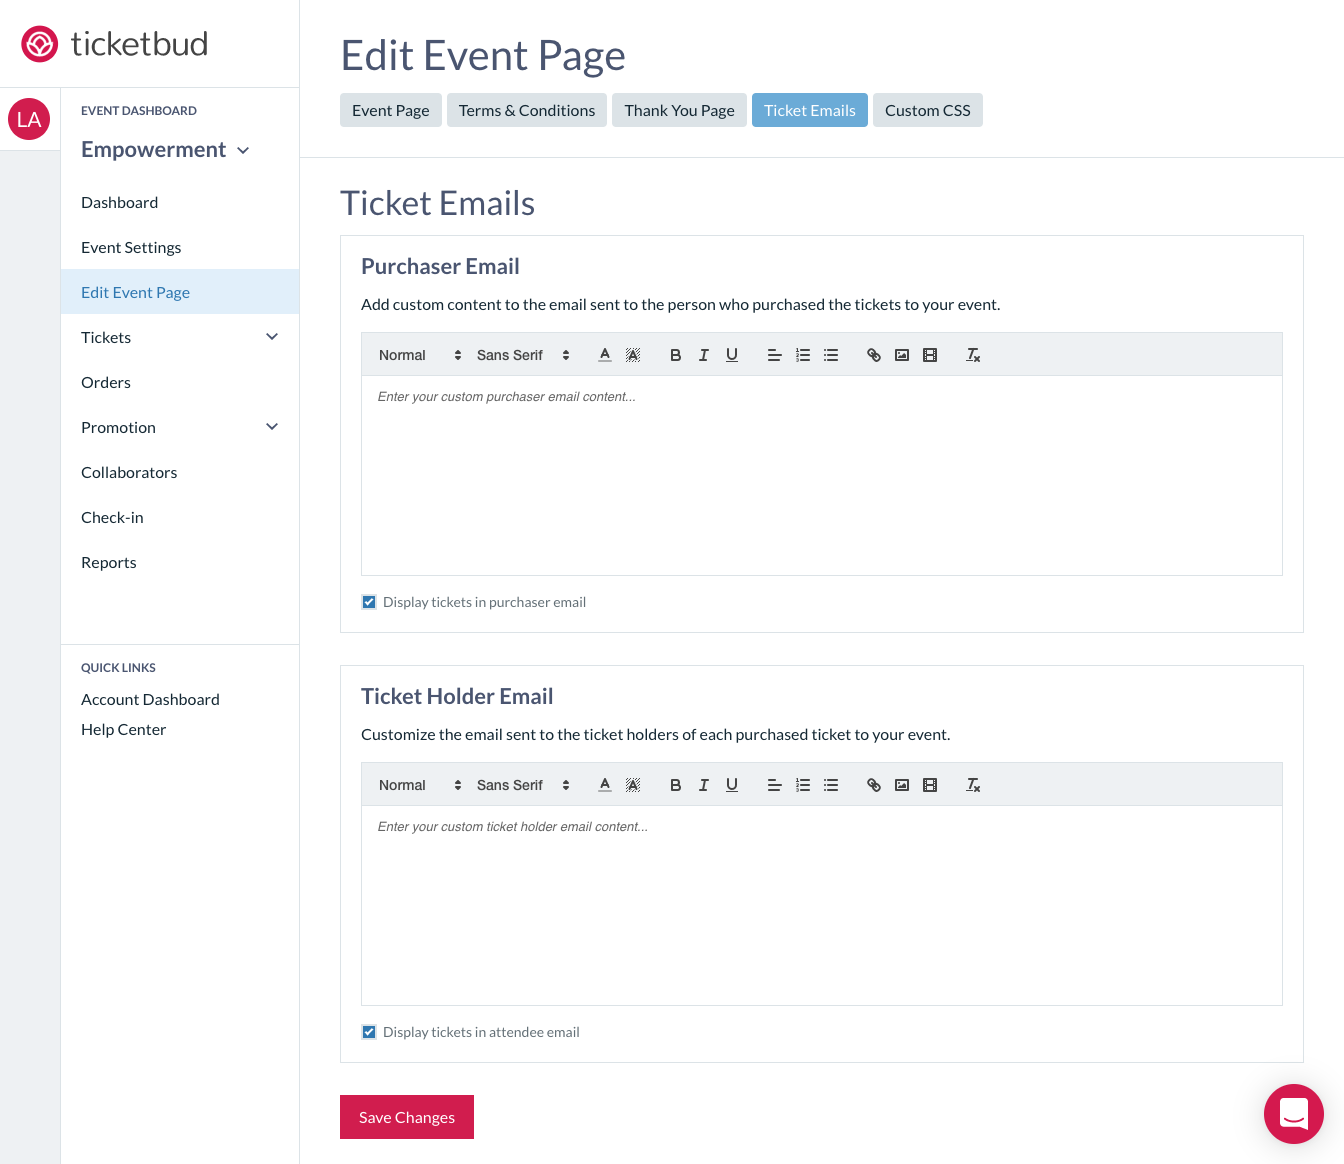 ticketbud.com_admin_events_2e9c4d0e-b2e1-11e9-b1f1-42010a717005_pages_emails.png